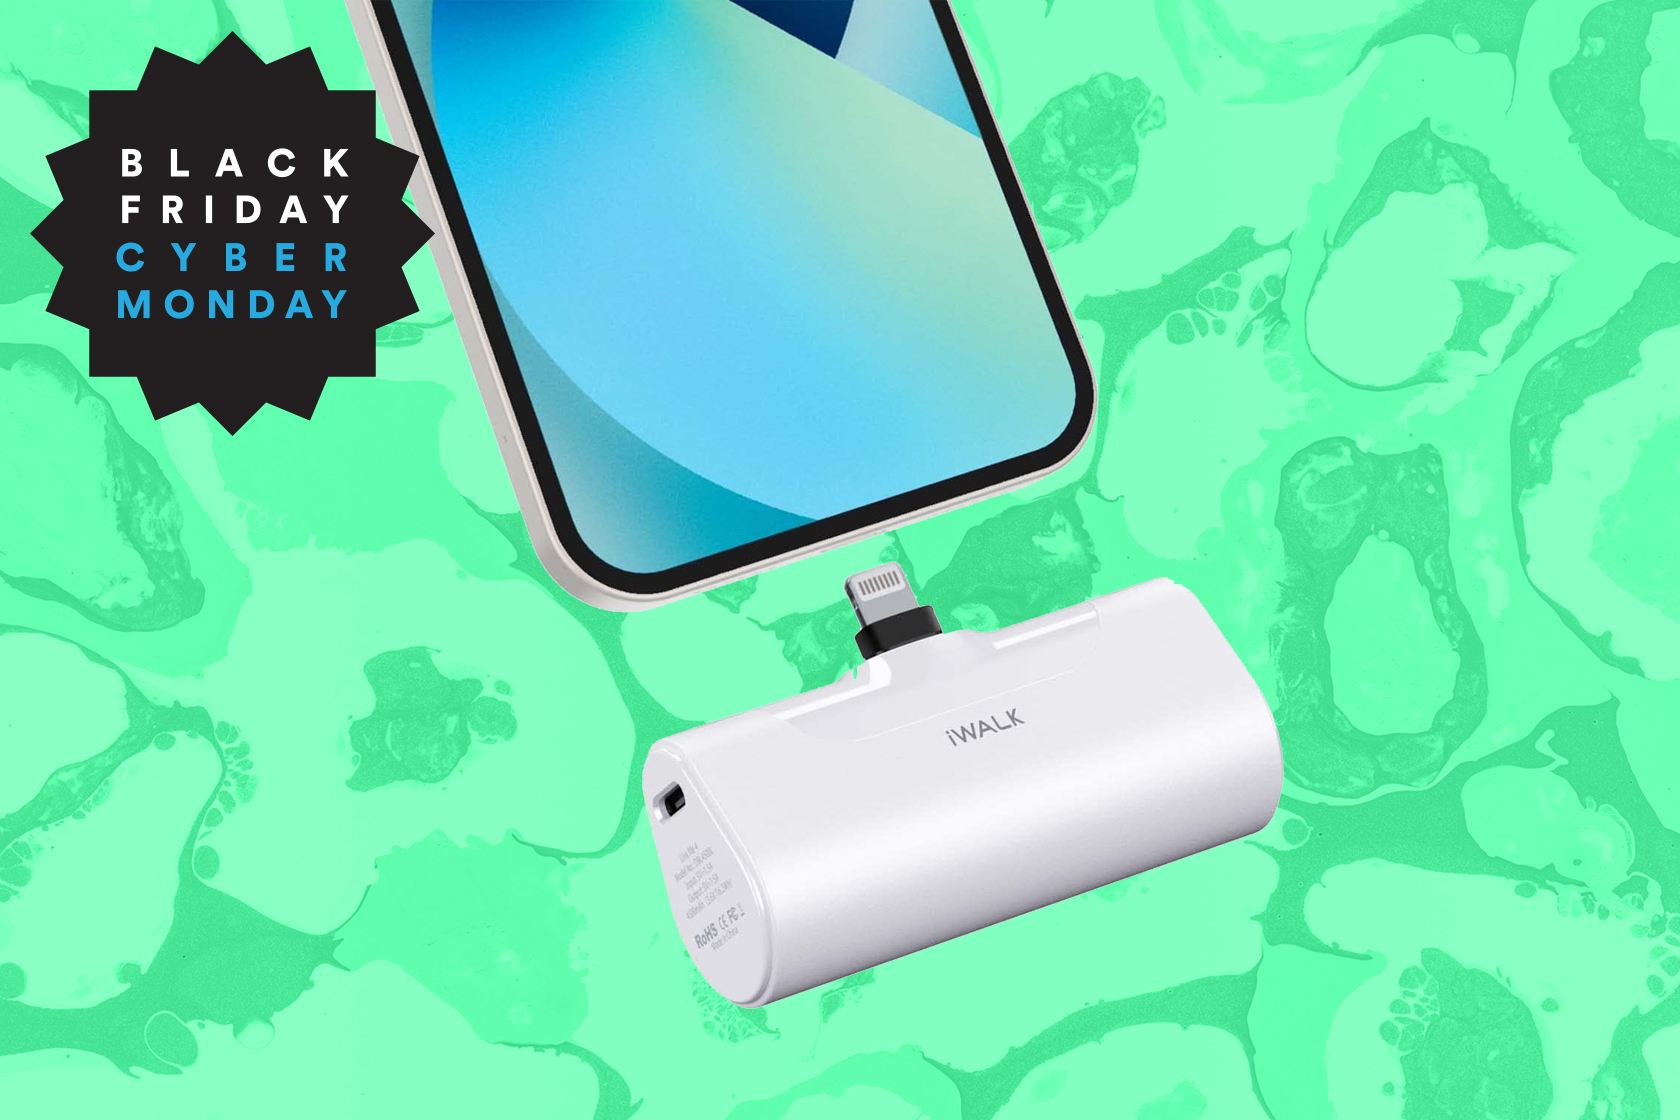 iWalk Mini Portable Charger Sale: Charge Your iPhone On The Go